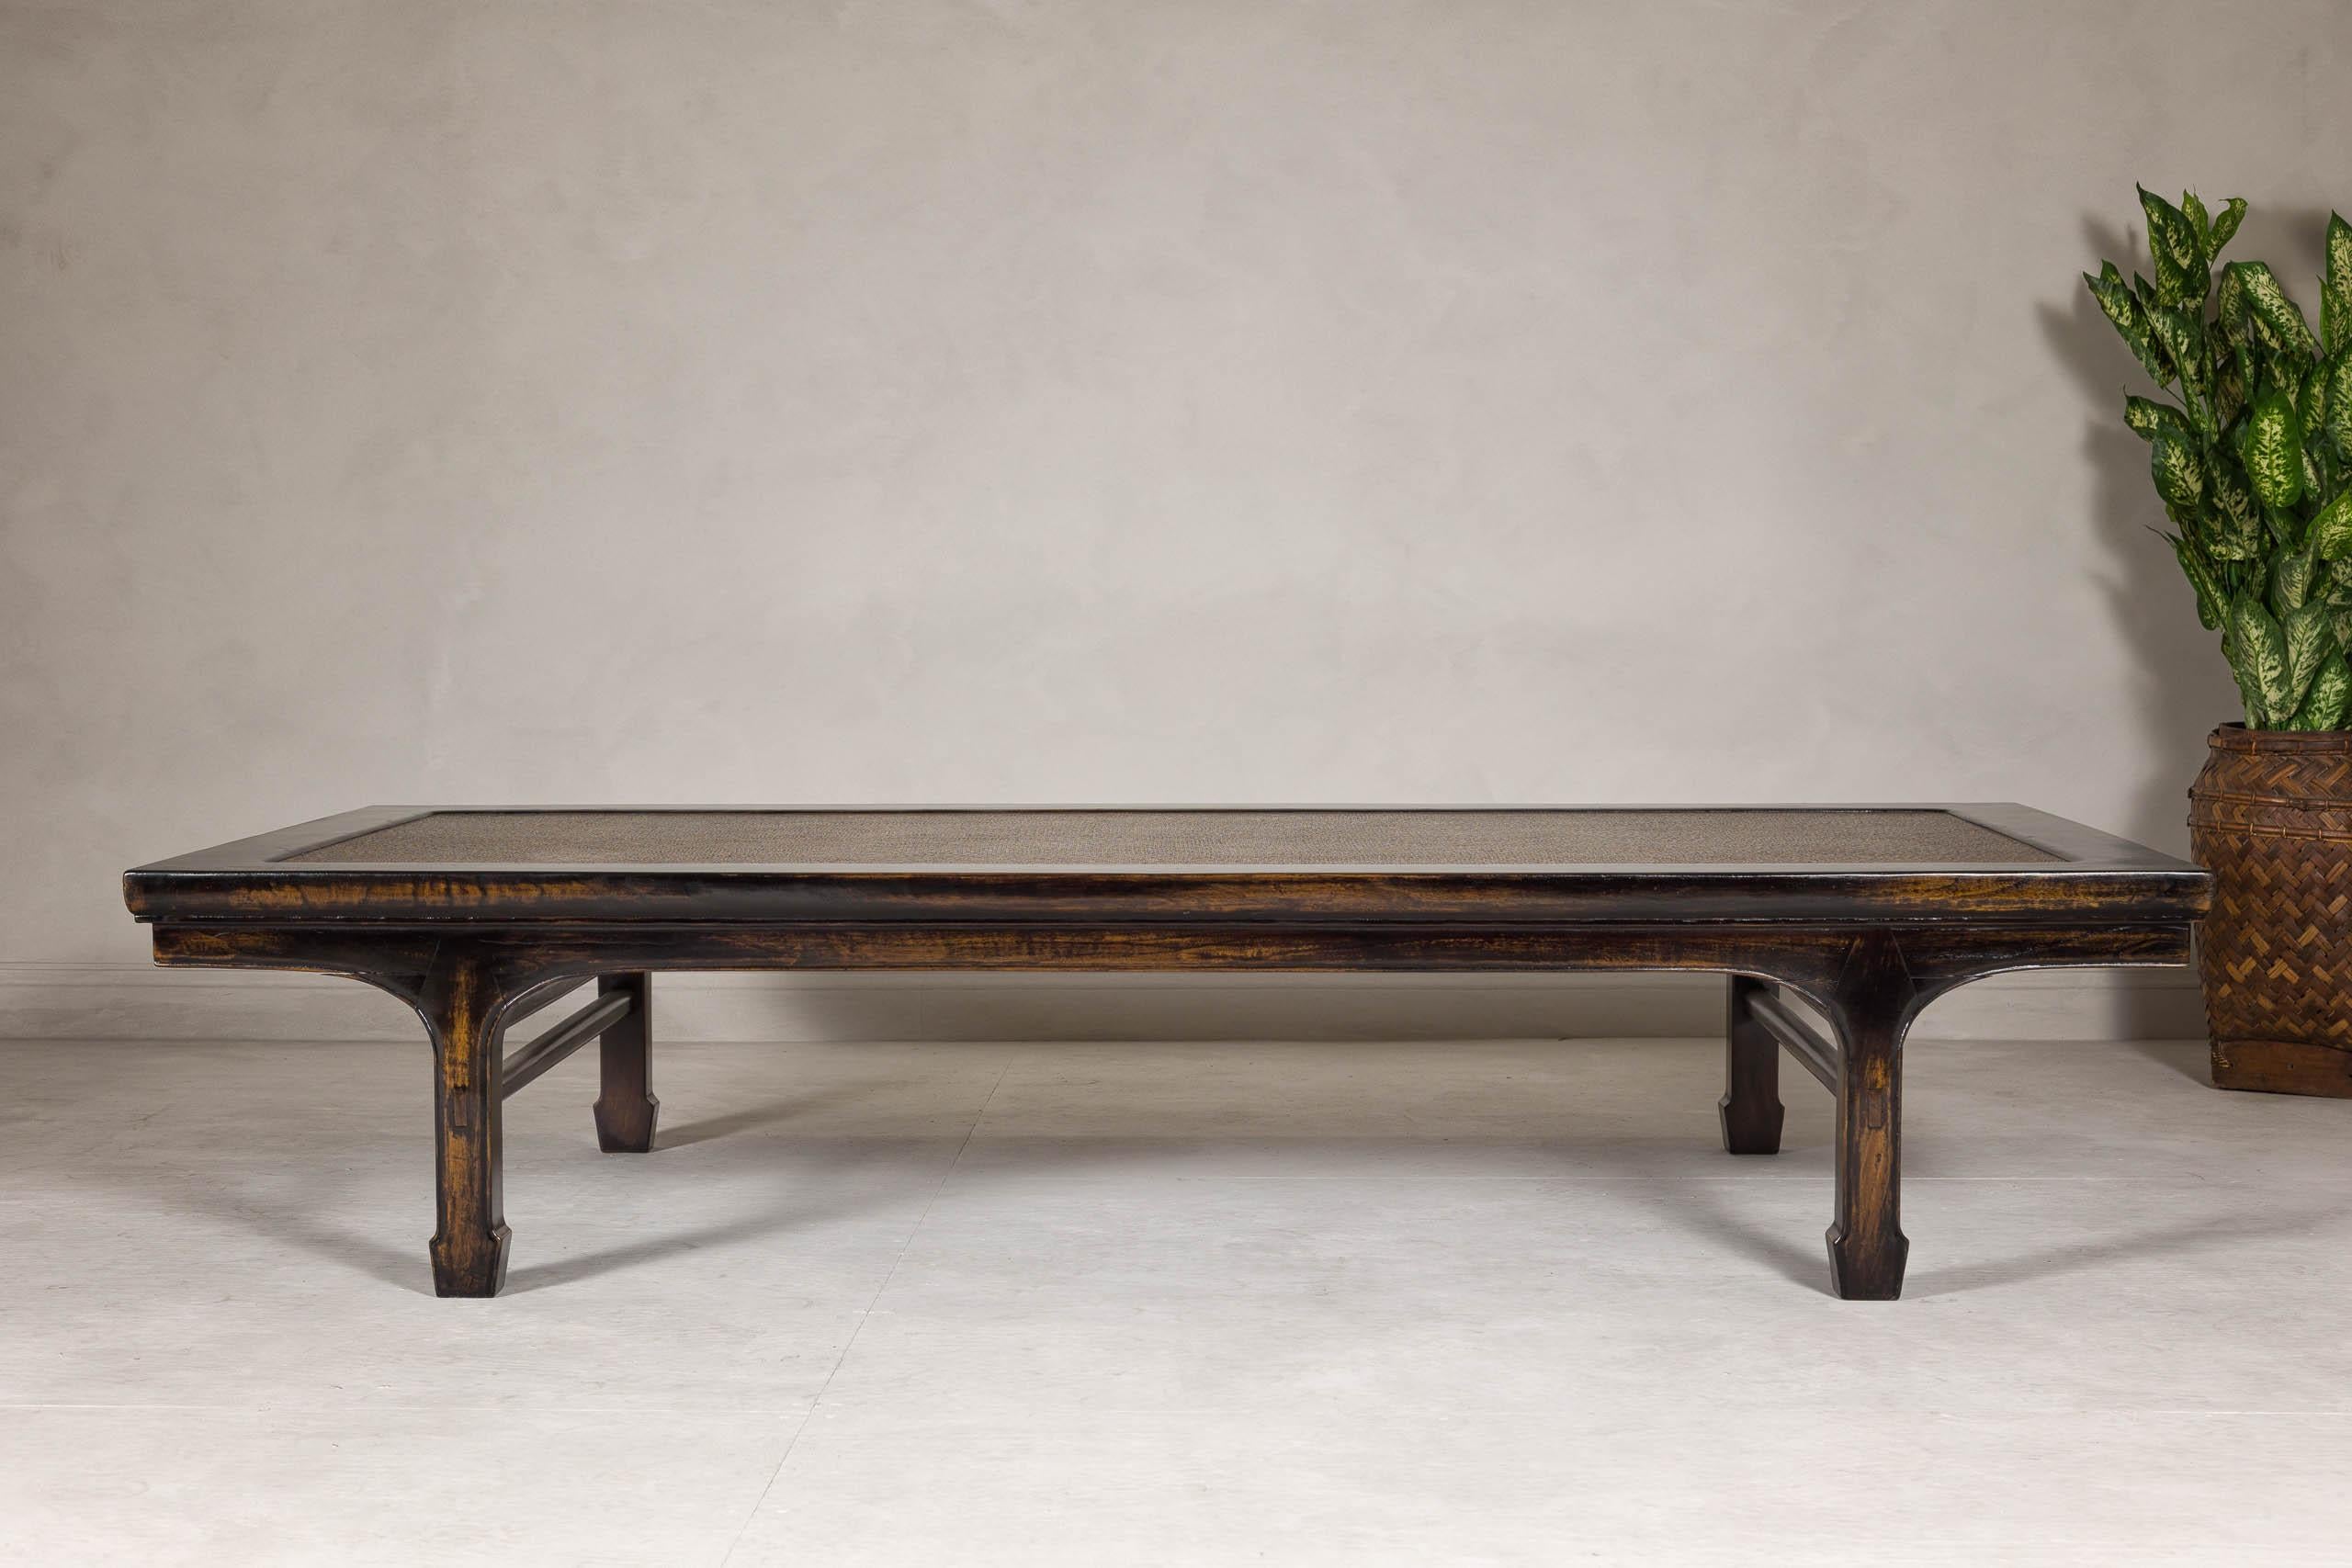 A Chinese Qing Dynasty period lacquered daybed or coffee table from the 19th century with woven matt rattan top and carved legs. Originating from the Qing Dynasty in the 19th century, this Chinese daybed or coffee table embodies the seamless blend